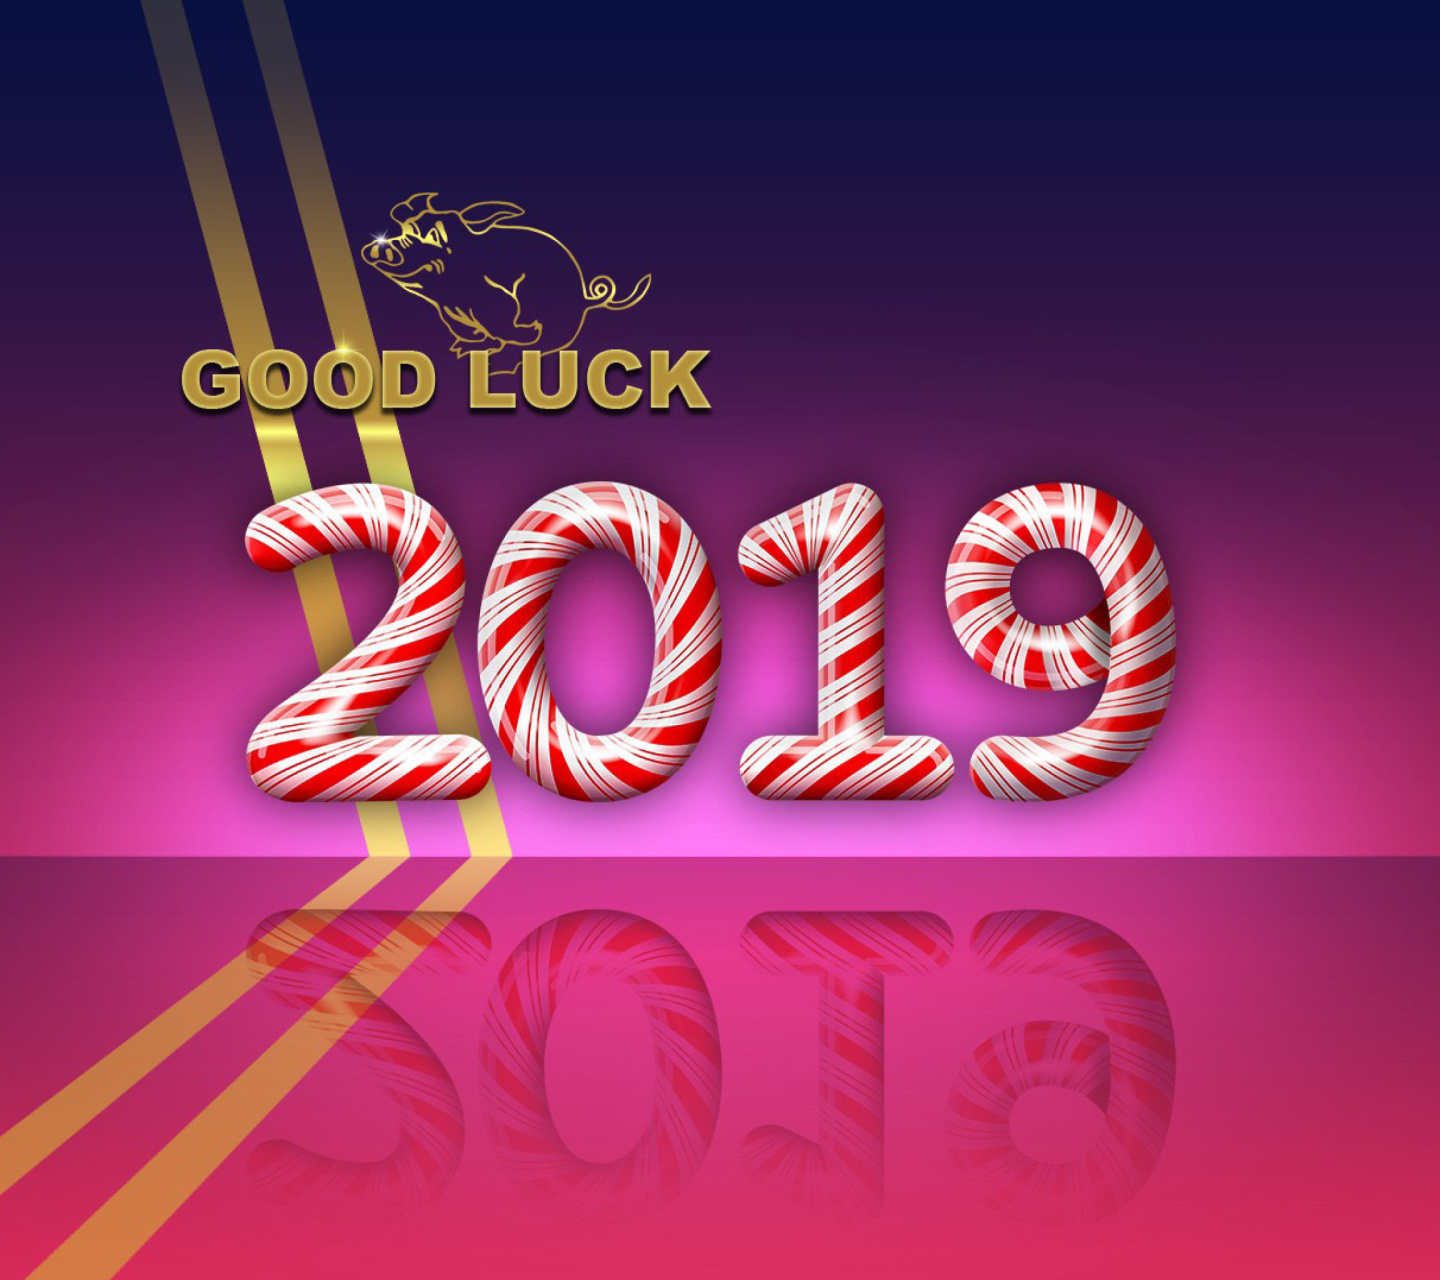 Good Luck in New Year 2019 wallpaper 1440x1280